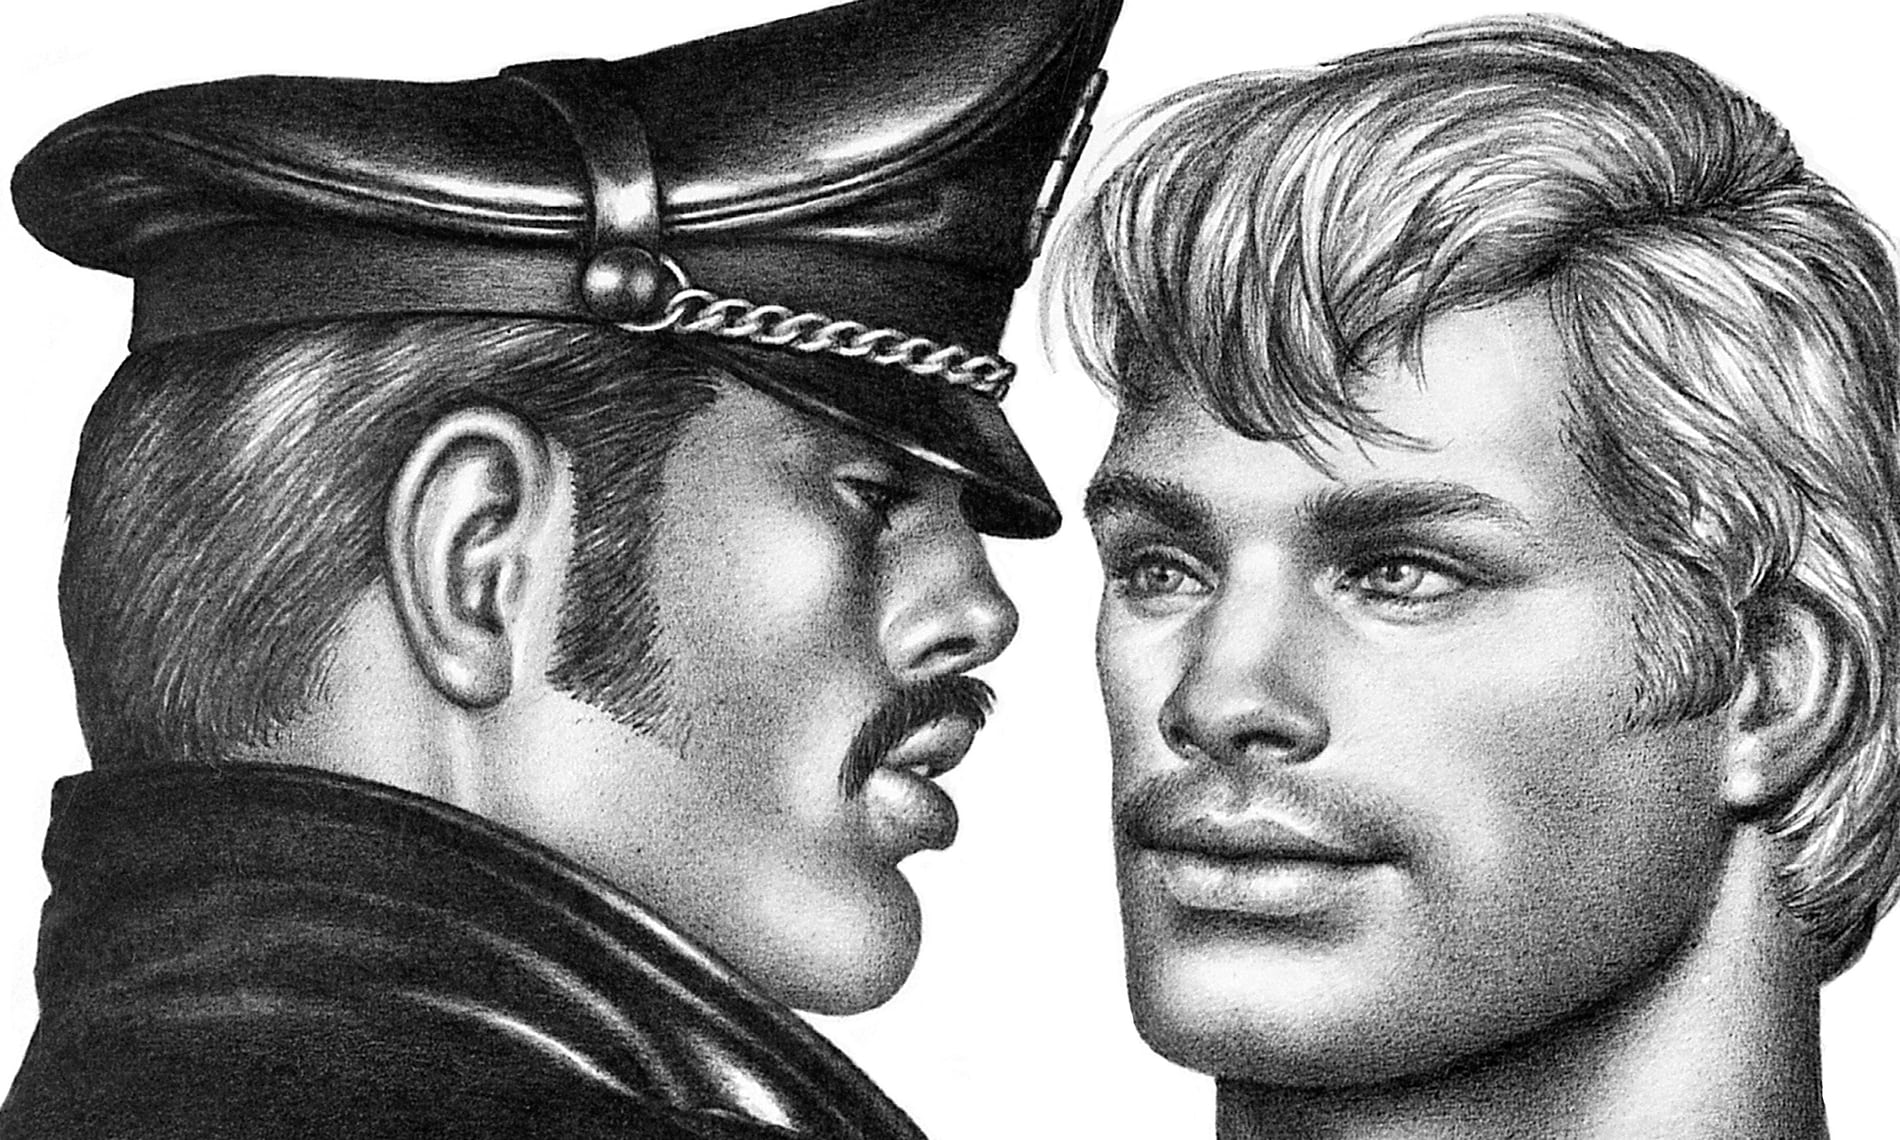 World of leather how Tom of Finland created a legendary gay aesthetic